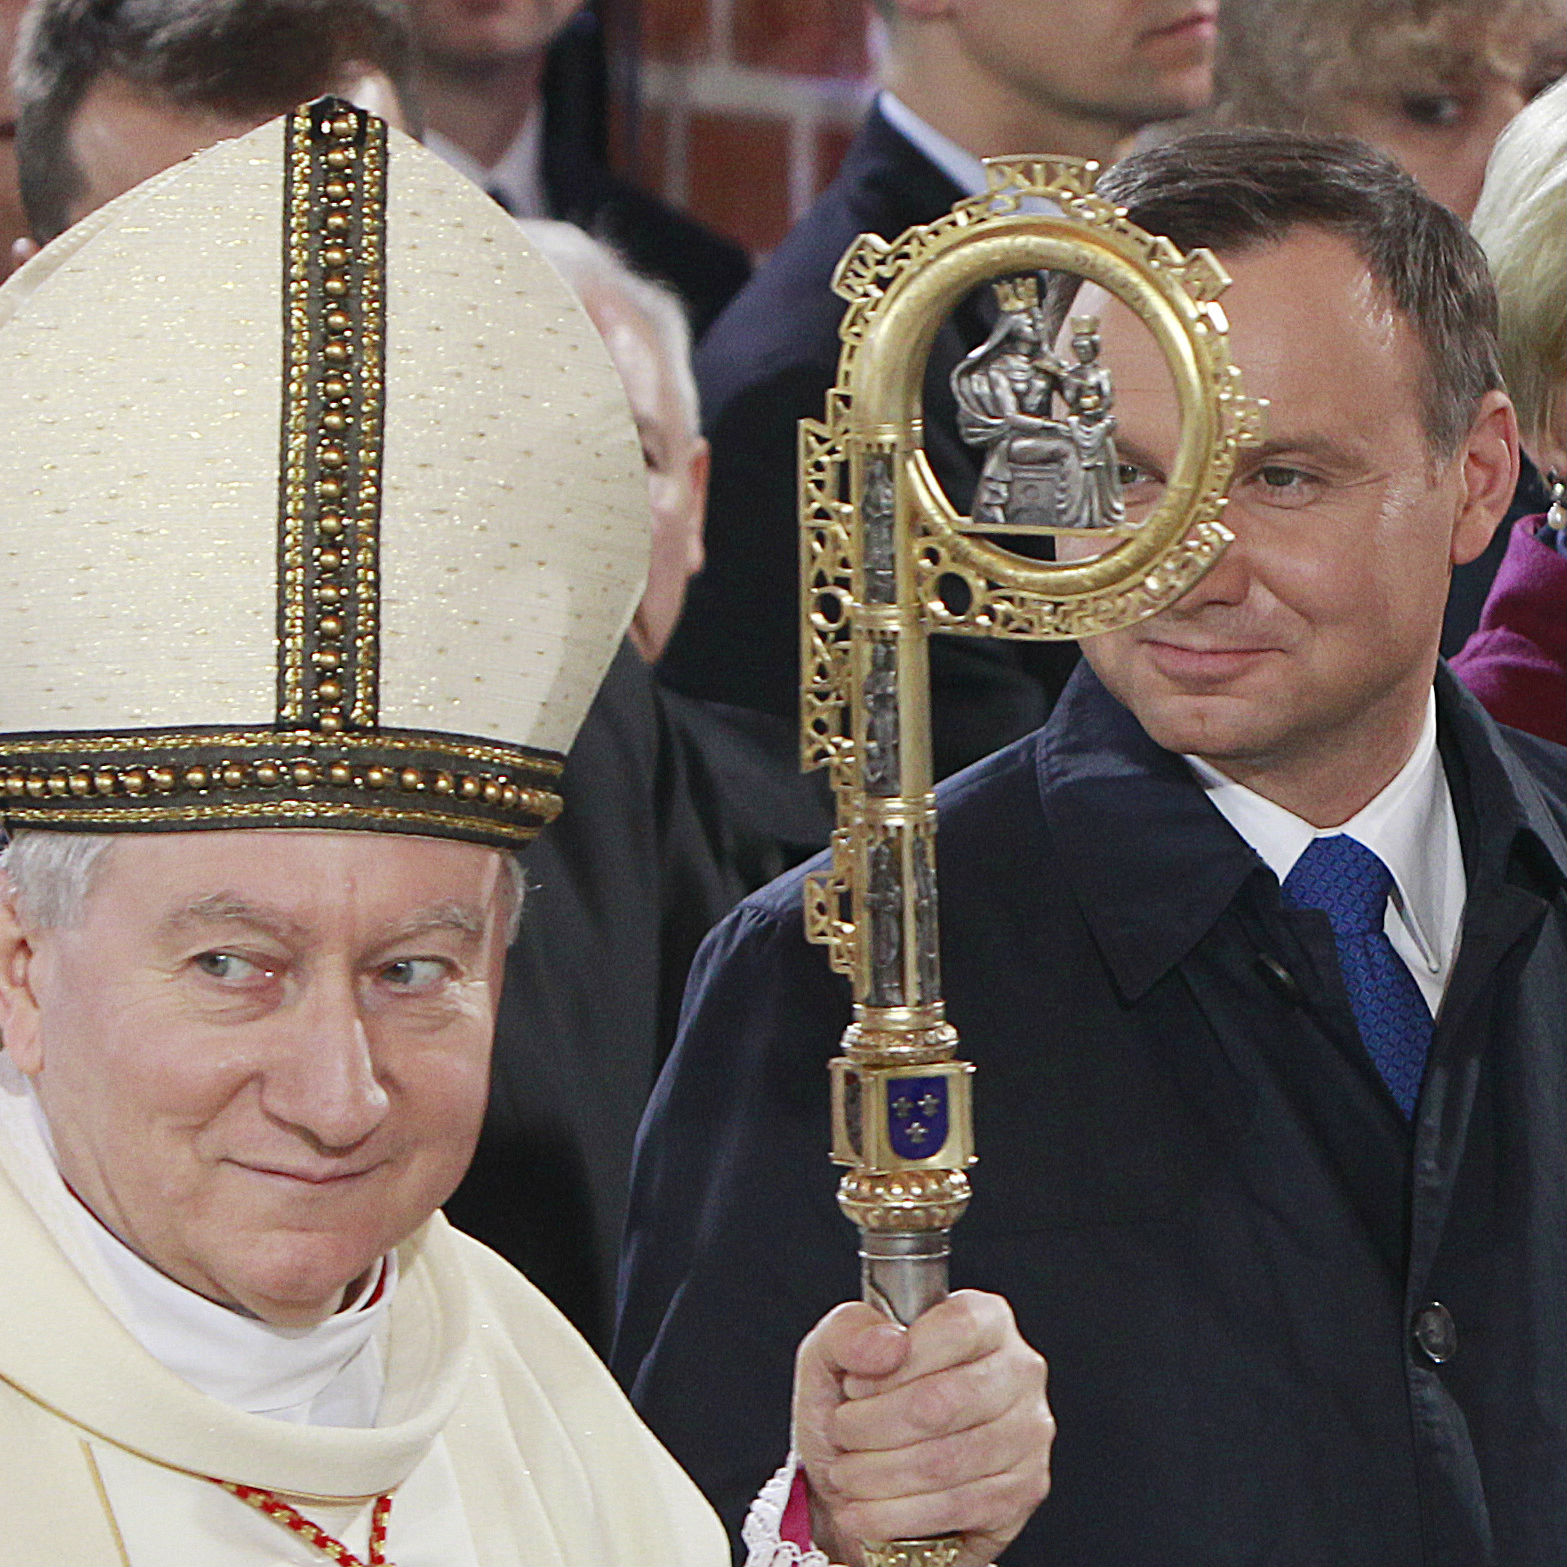 Poland celebrates 1050 years of Catholicism amid tension between Church and State